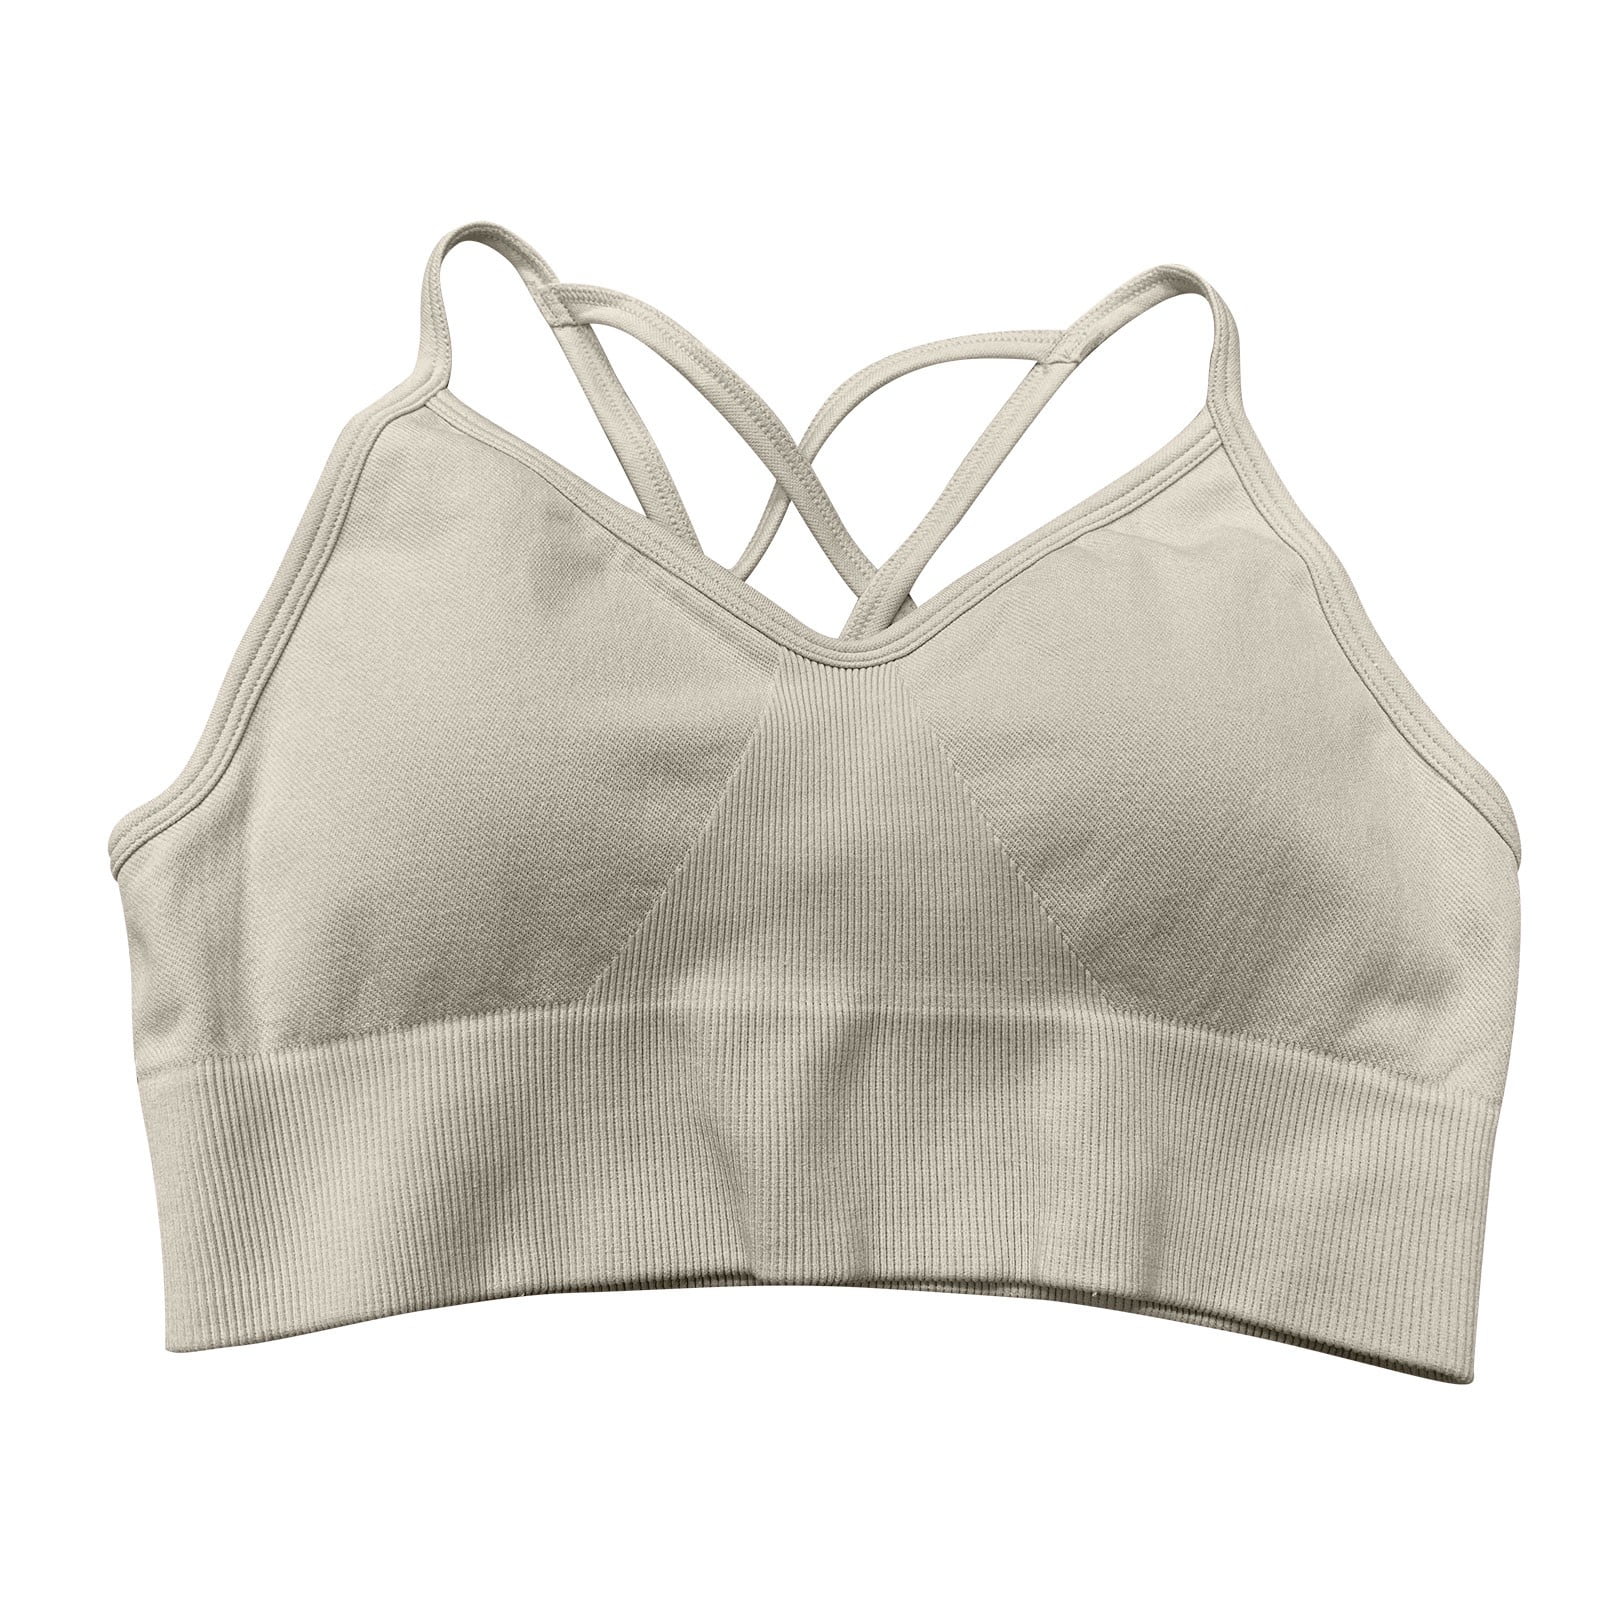 Buy Ouber Women's Ribbed Sports Bras High Impact Strappy Back